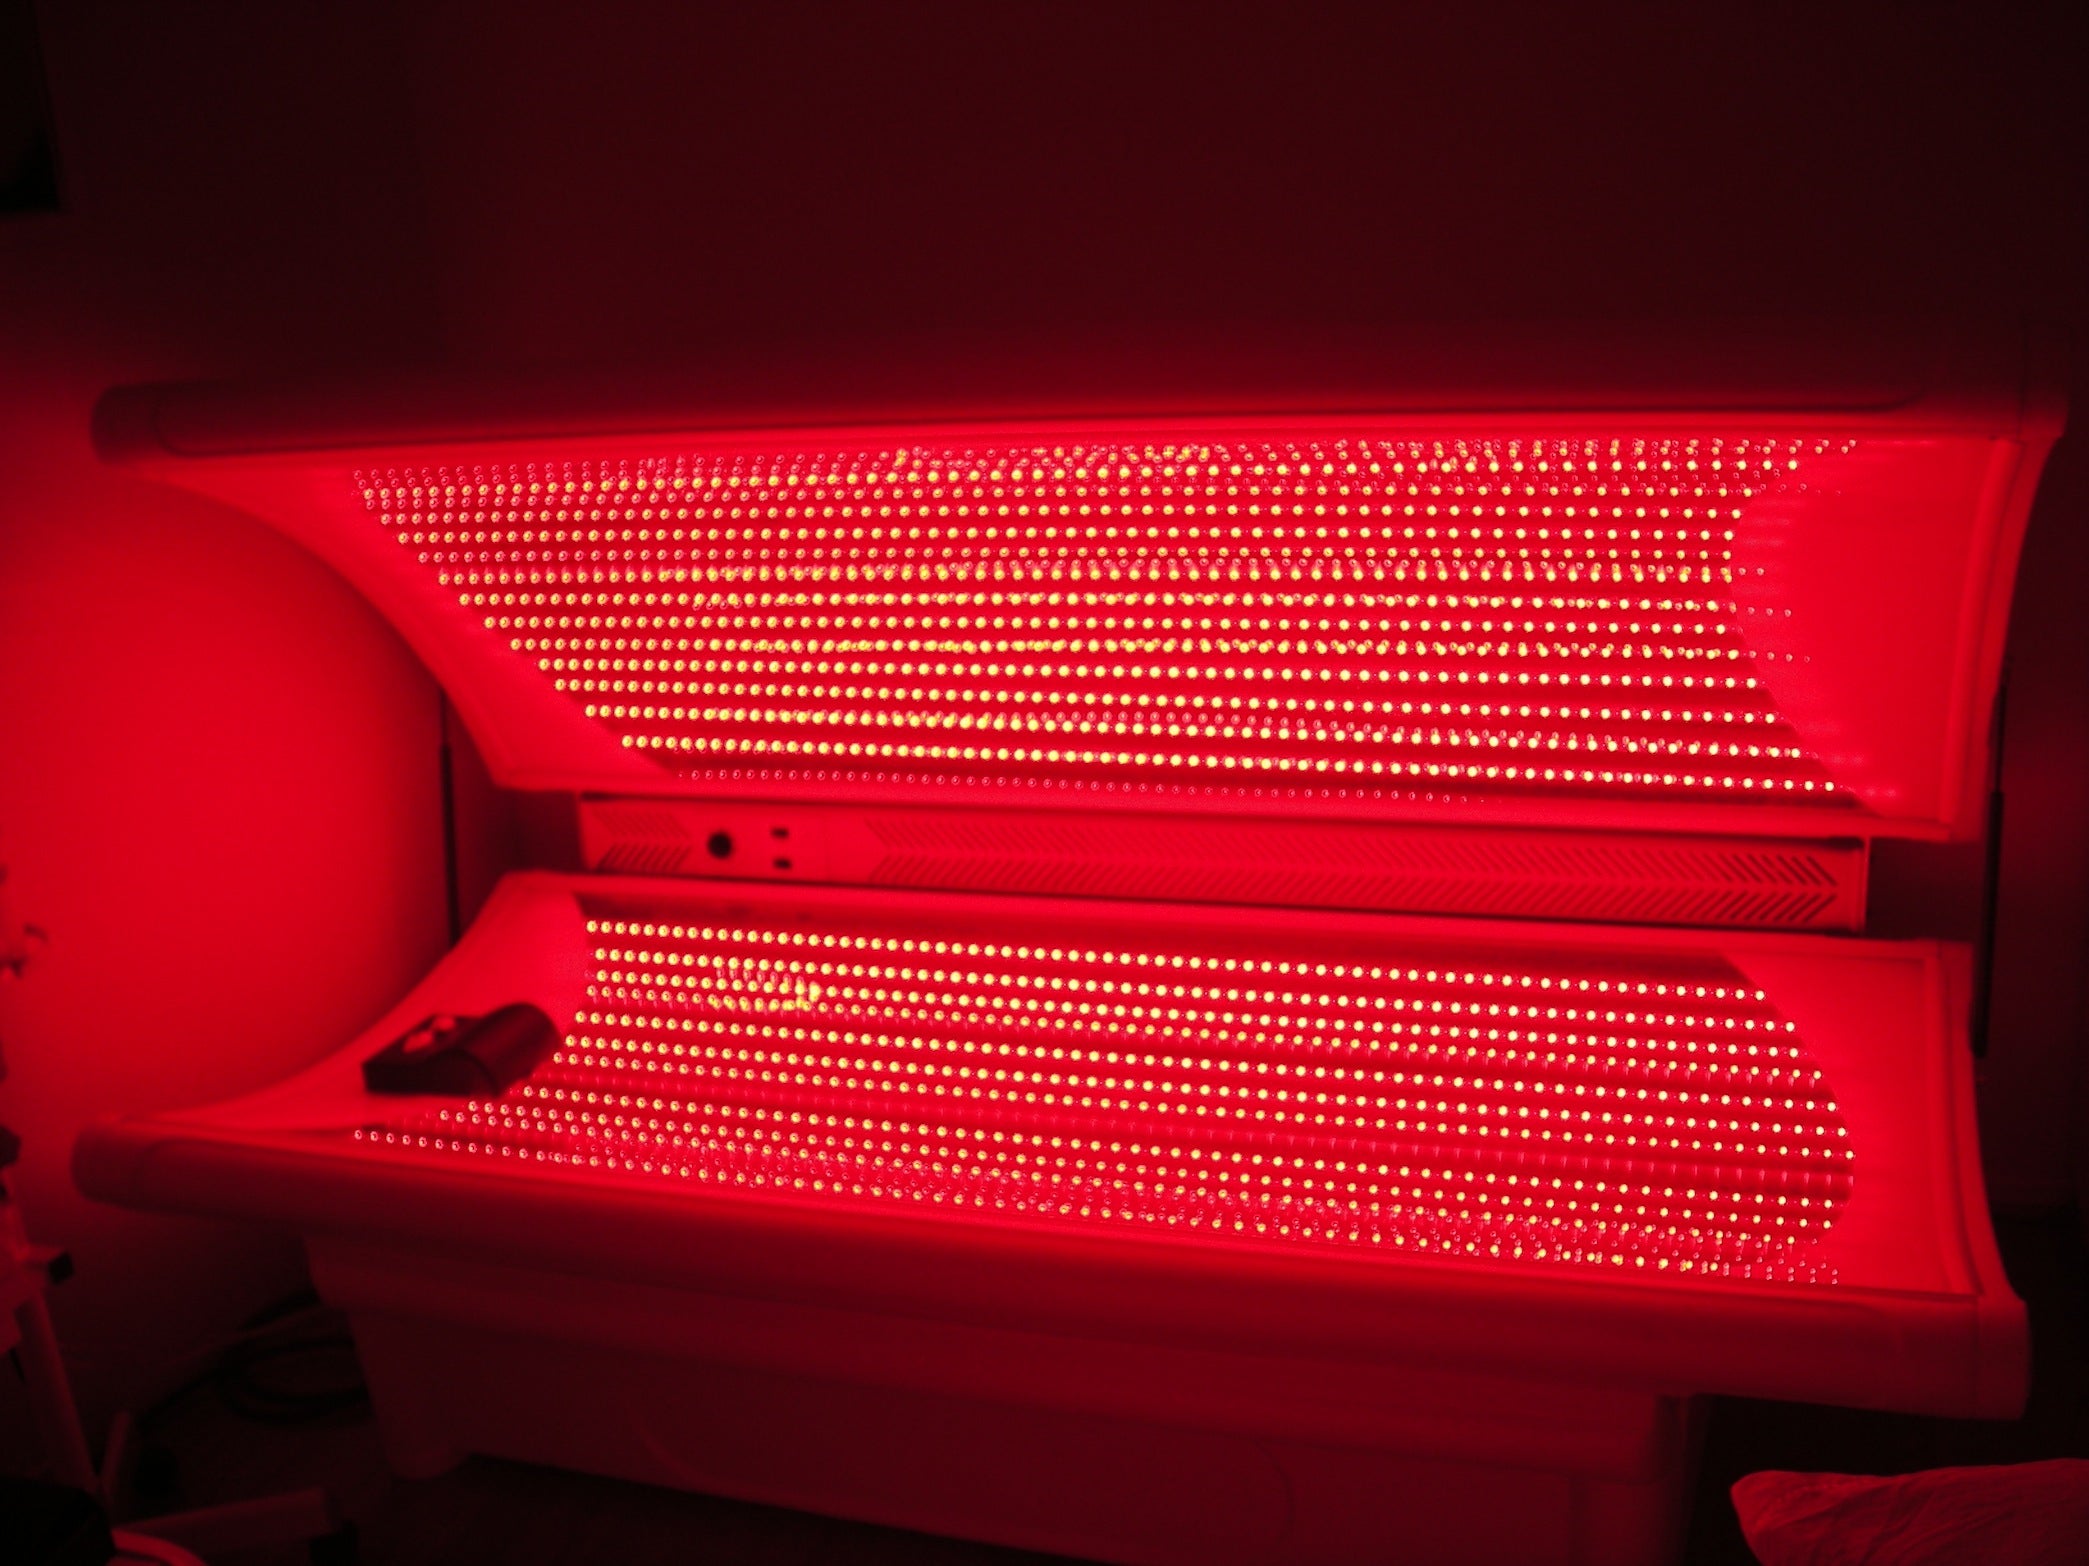 LED Light Therapy Can Give You Plumper, Firmer, Younger Loking Skin